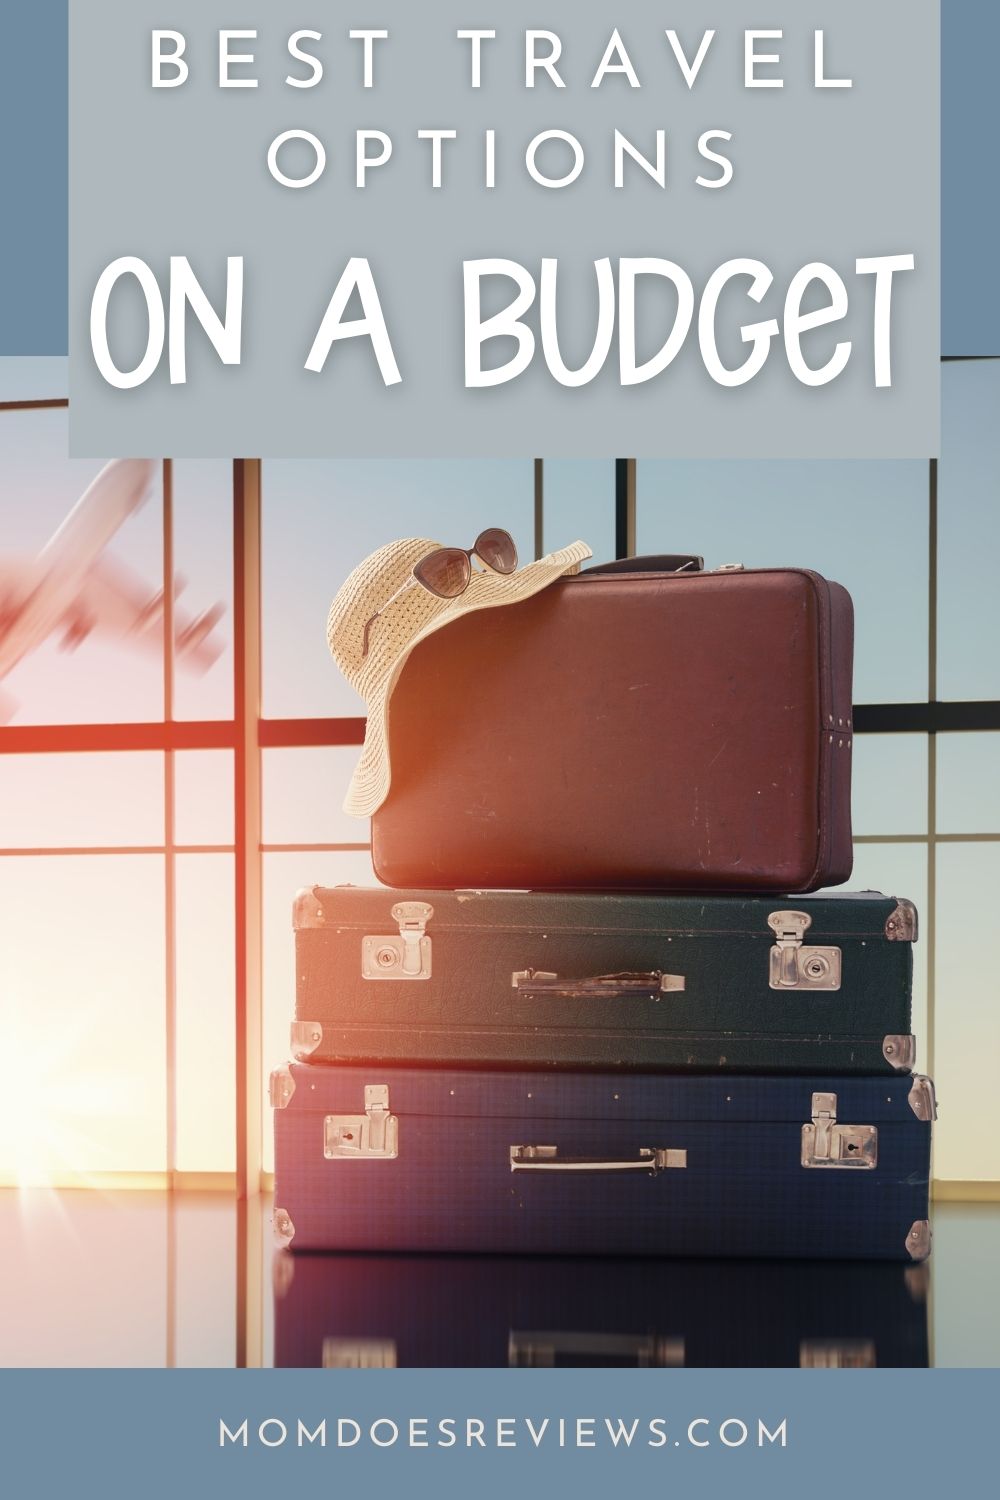 Best Travel Options for Vacations on a Budget